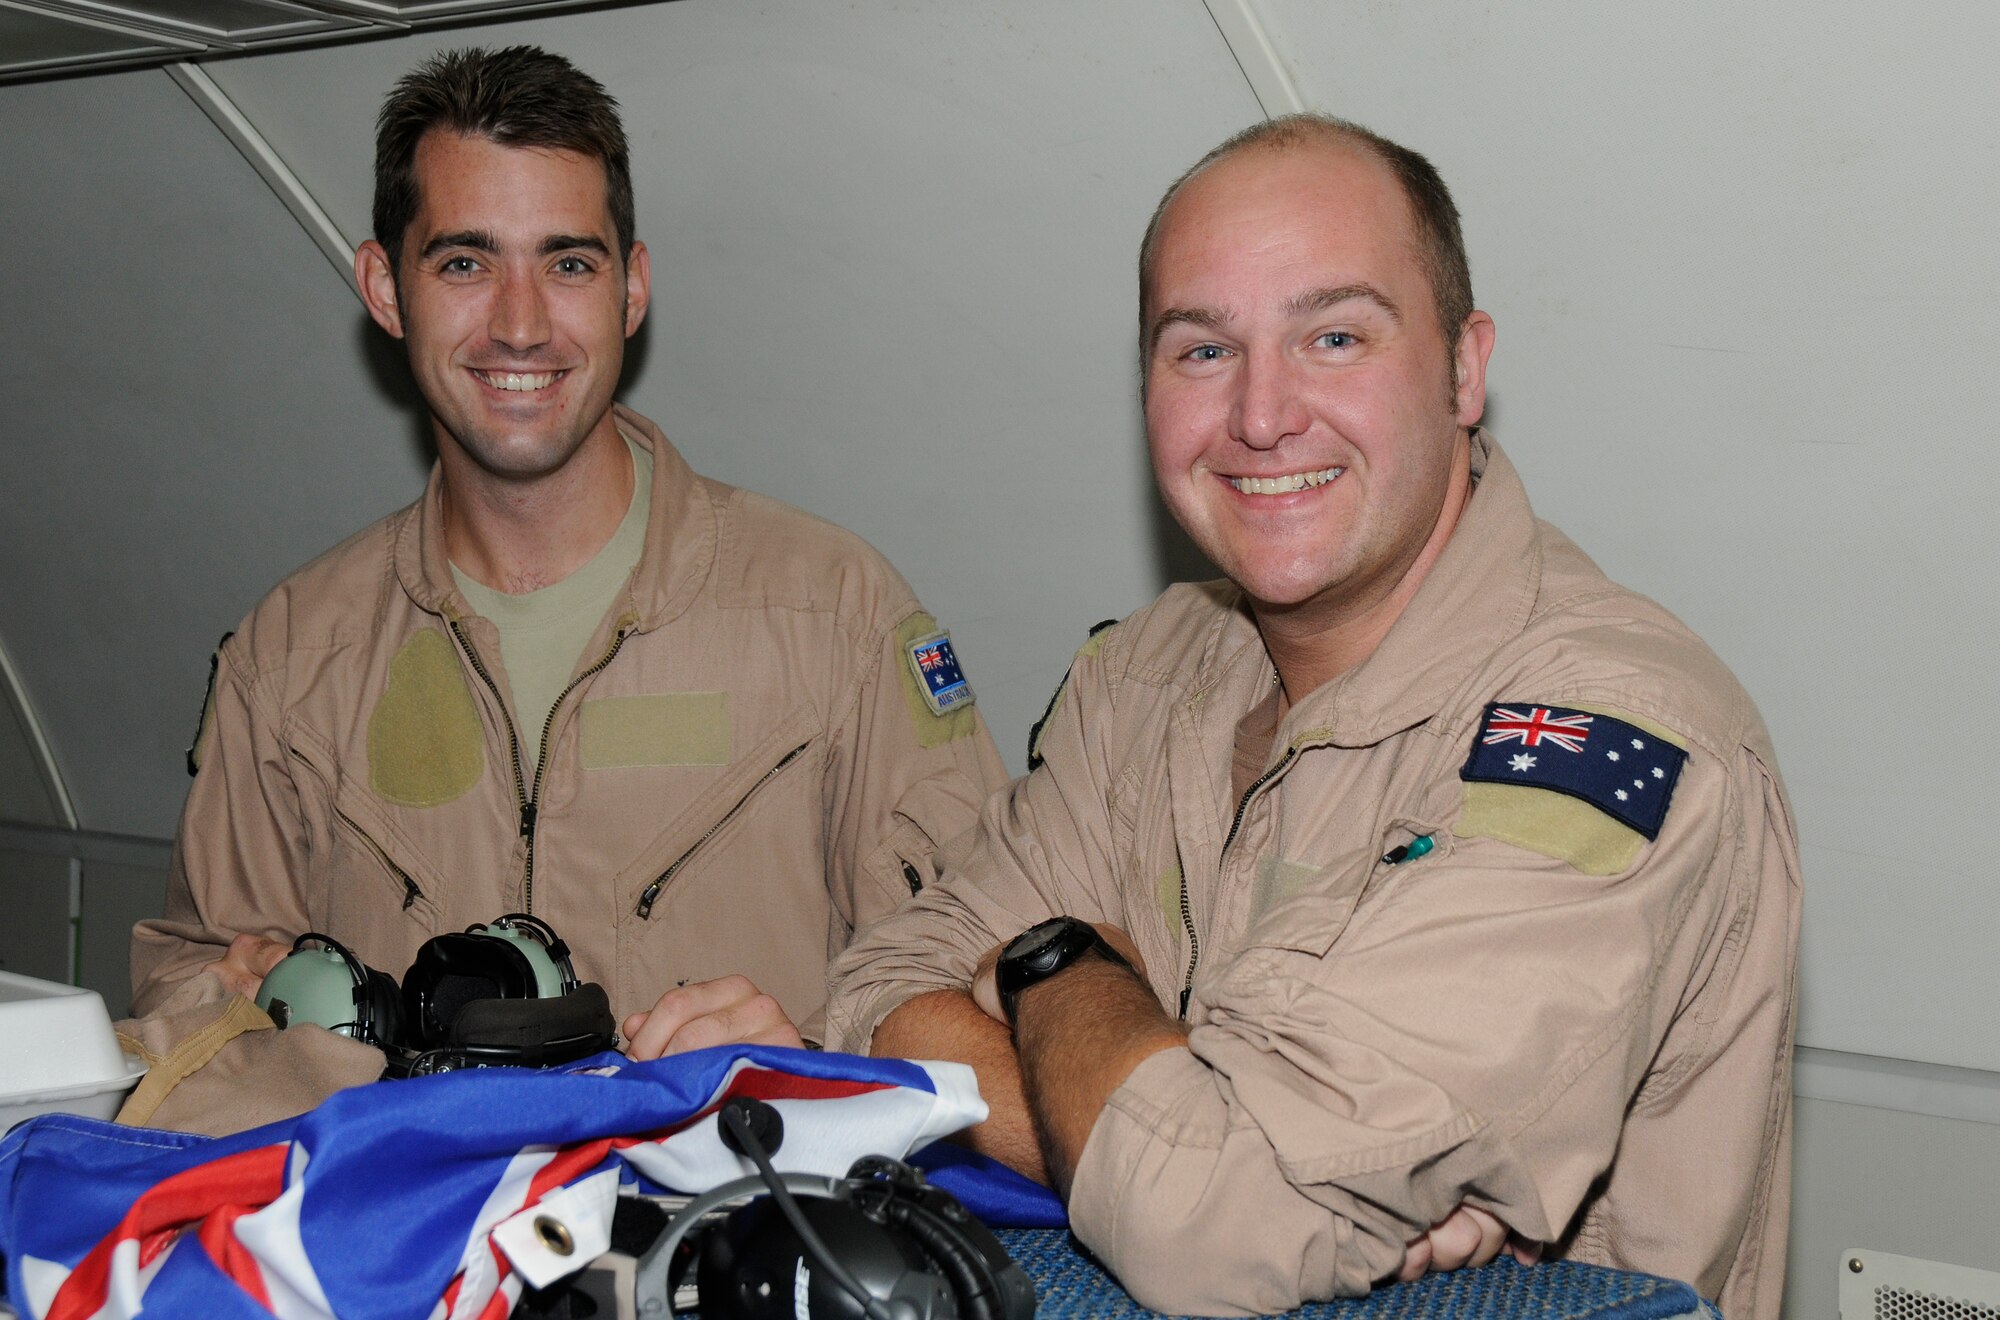 SOUTHWEST ASIA -- Flight Lieutenants Nathan Yabsley and Troy Roempke with the 965th Expeditionary Airborne Air Control Squadron proudly display the Australian flag here Dec. 24. They were preparing to fly their final mission with the 380th Air Expeditionary Wing before heading home to Australia. They have been with the 965th out of Tinker Air Force Base, Okla. for three years with the last four months in a deployed location gaining valuable frontline experience. While deployed with the 965th Flight Lieutenants Yablsey and Roempke have flown 20 missions in the area of responsibility in support of Operations Iraqi and Enduring Freedom. (U.S. Air Force photo/Tech. Sgt. Christopher A. Campbell)(released)